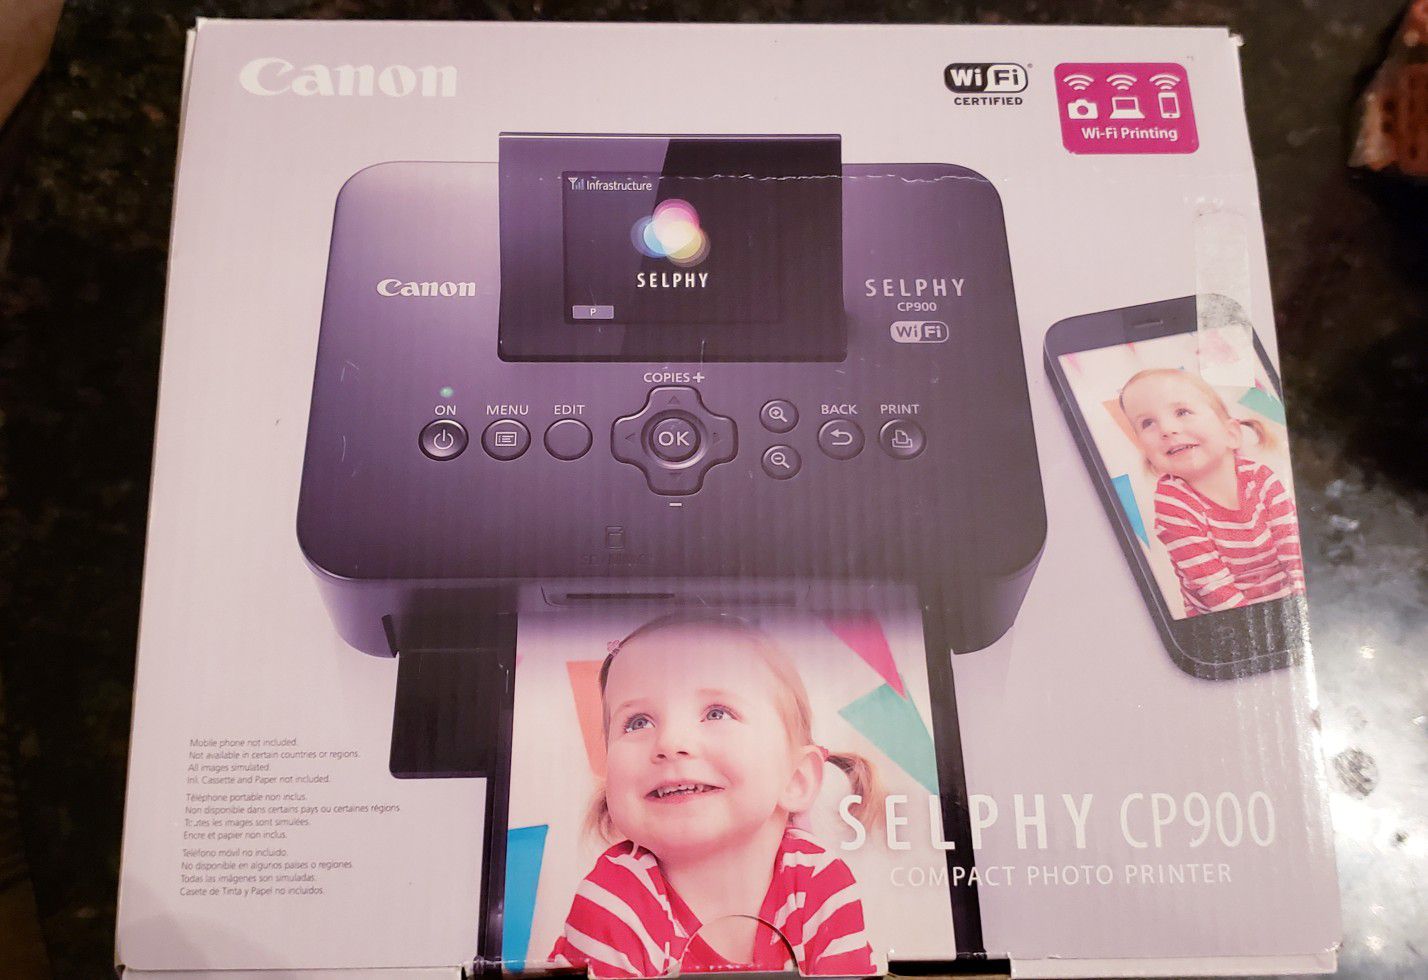 Canon Selphy CP 900